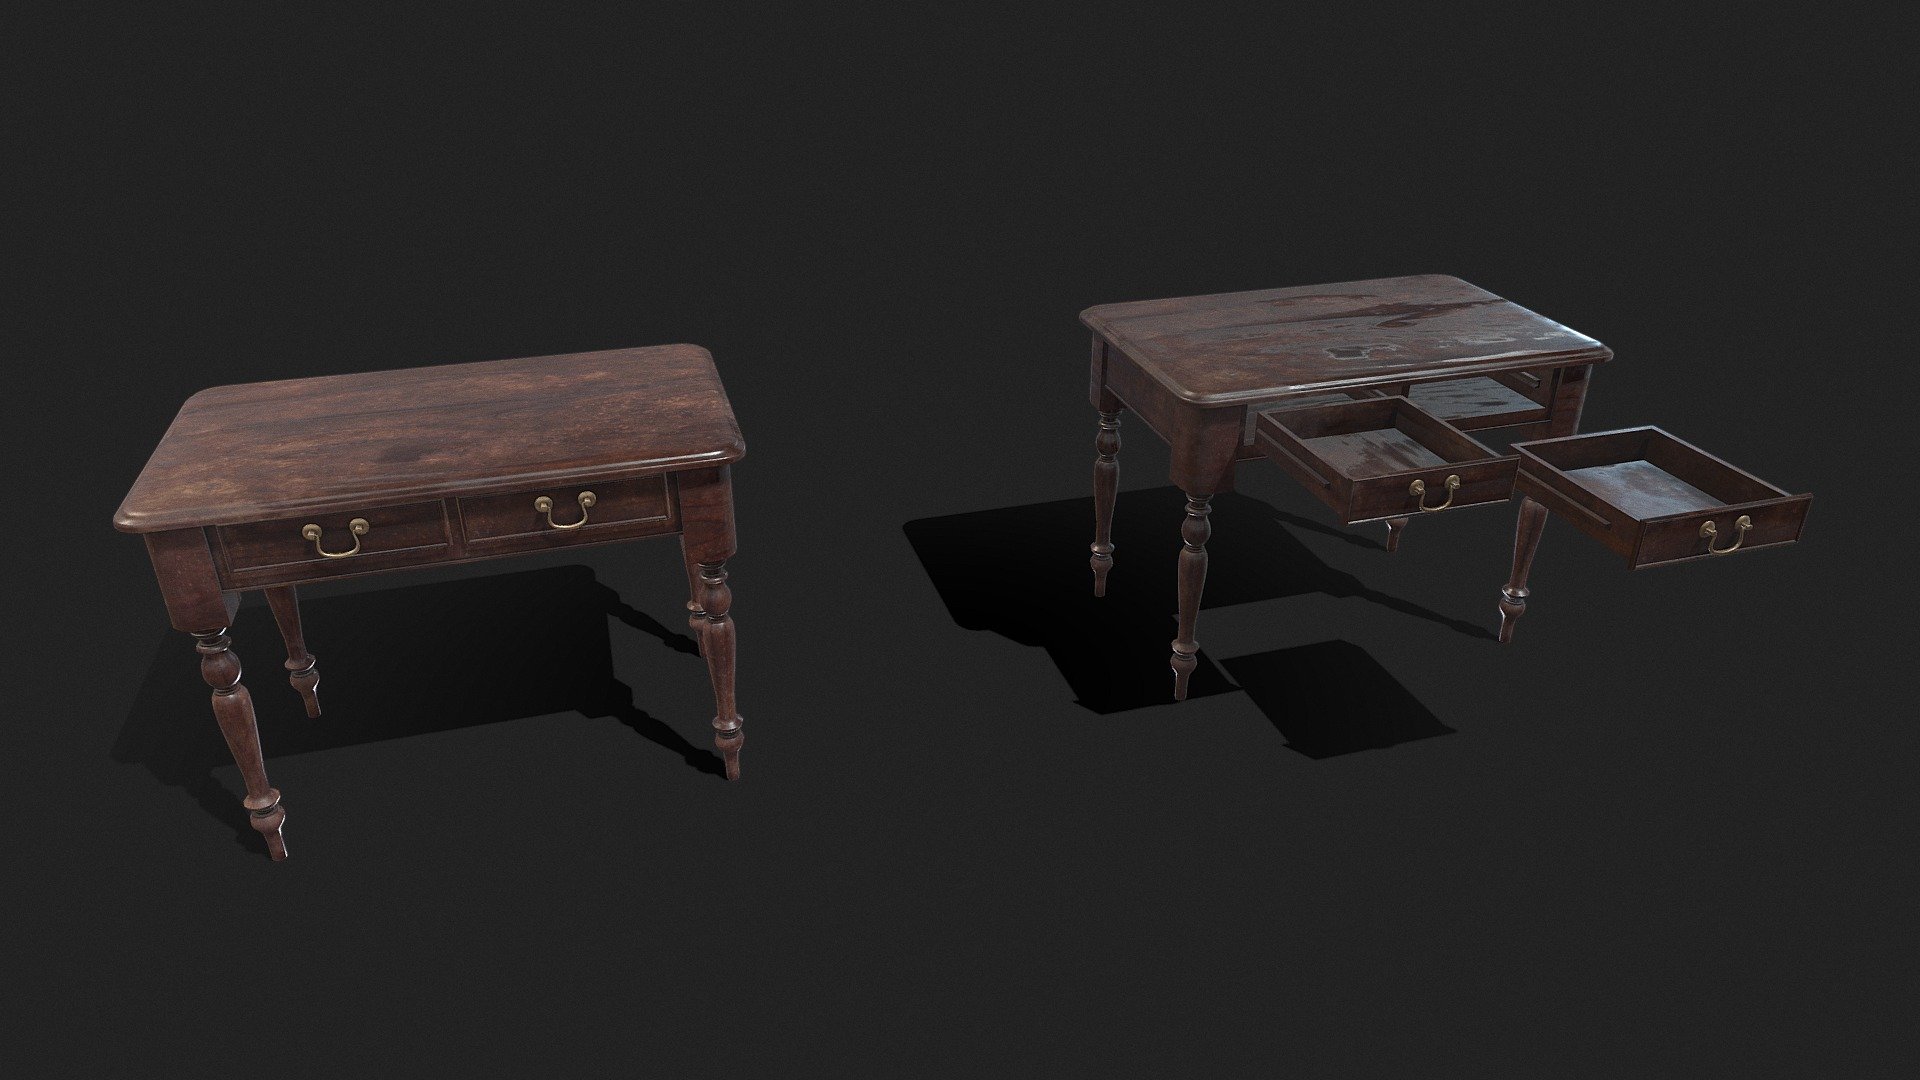 An vintage desk. The drawers are separated from the desk and openable.

It has 2 materials, one more dark than the other.

Both materials(Light and Dark) have 2048x2048 textures packs (PBR Metal Rough, Unity HDRP, Unity Standard Metallic)





PBR Metal Rough- BaseColor, AO, Height, Normal, Roughness and Metallic;




Unity HDRP- BaseColor, MaskMap, Normal;




Unity Standard Metallic- AlbedoTransparency, MetallicSmoothness, Normal;




Unreal Engine 4- BaseColor, Normal, OcclusionRoughnessMetallic;



The package also has the .fbx, .obj, .stl, .dae and .blend file 3d model